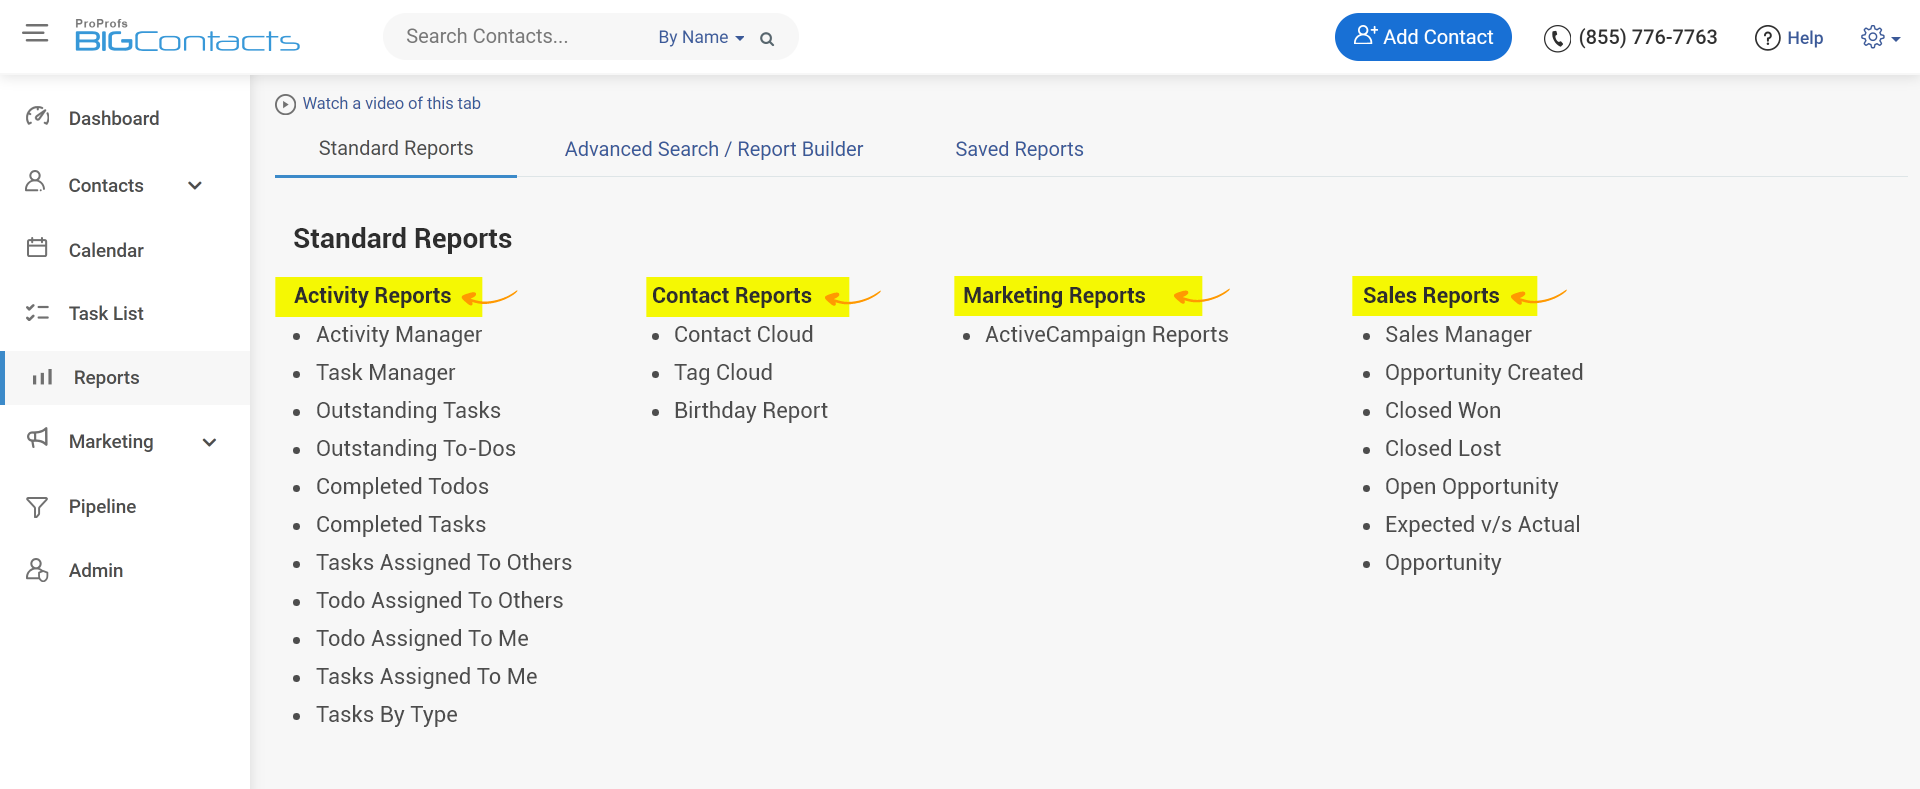 Reporting and Analytics feature of CRM